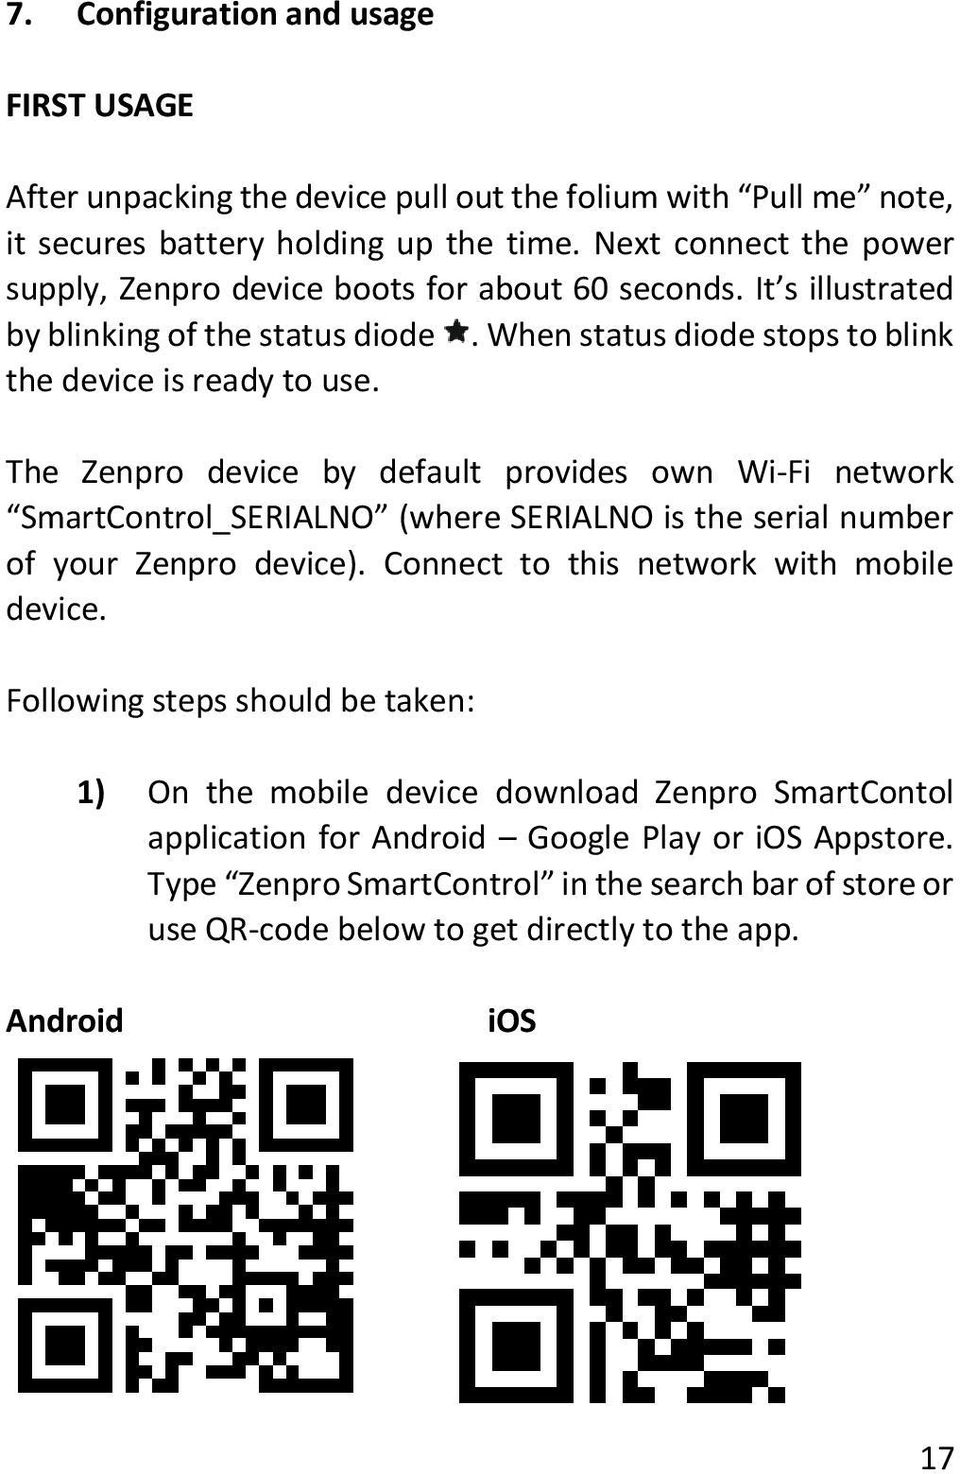 The Zenpro device by default provides own Wi-Fi network SmartControl_SERIALNO (where SERIALNO is the serial number of your Zenpro device). Connect to this network with mobile device.